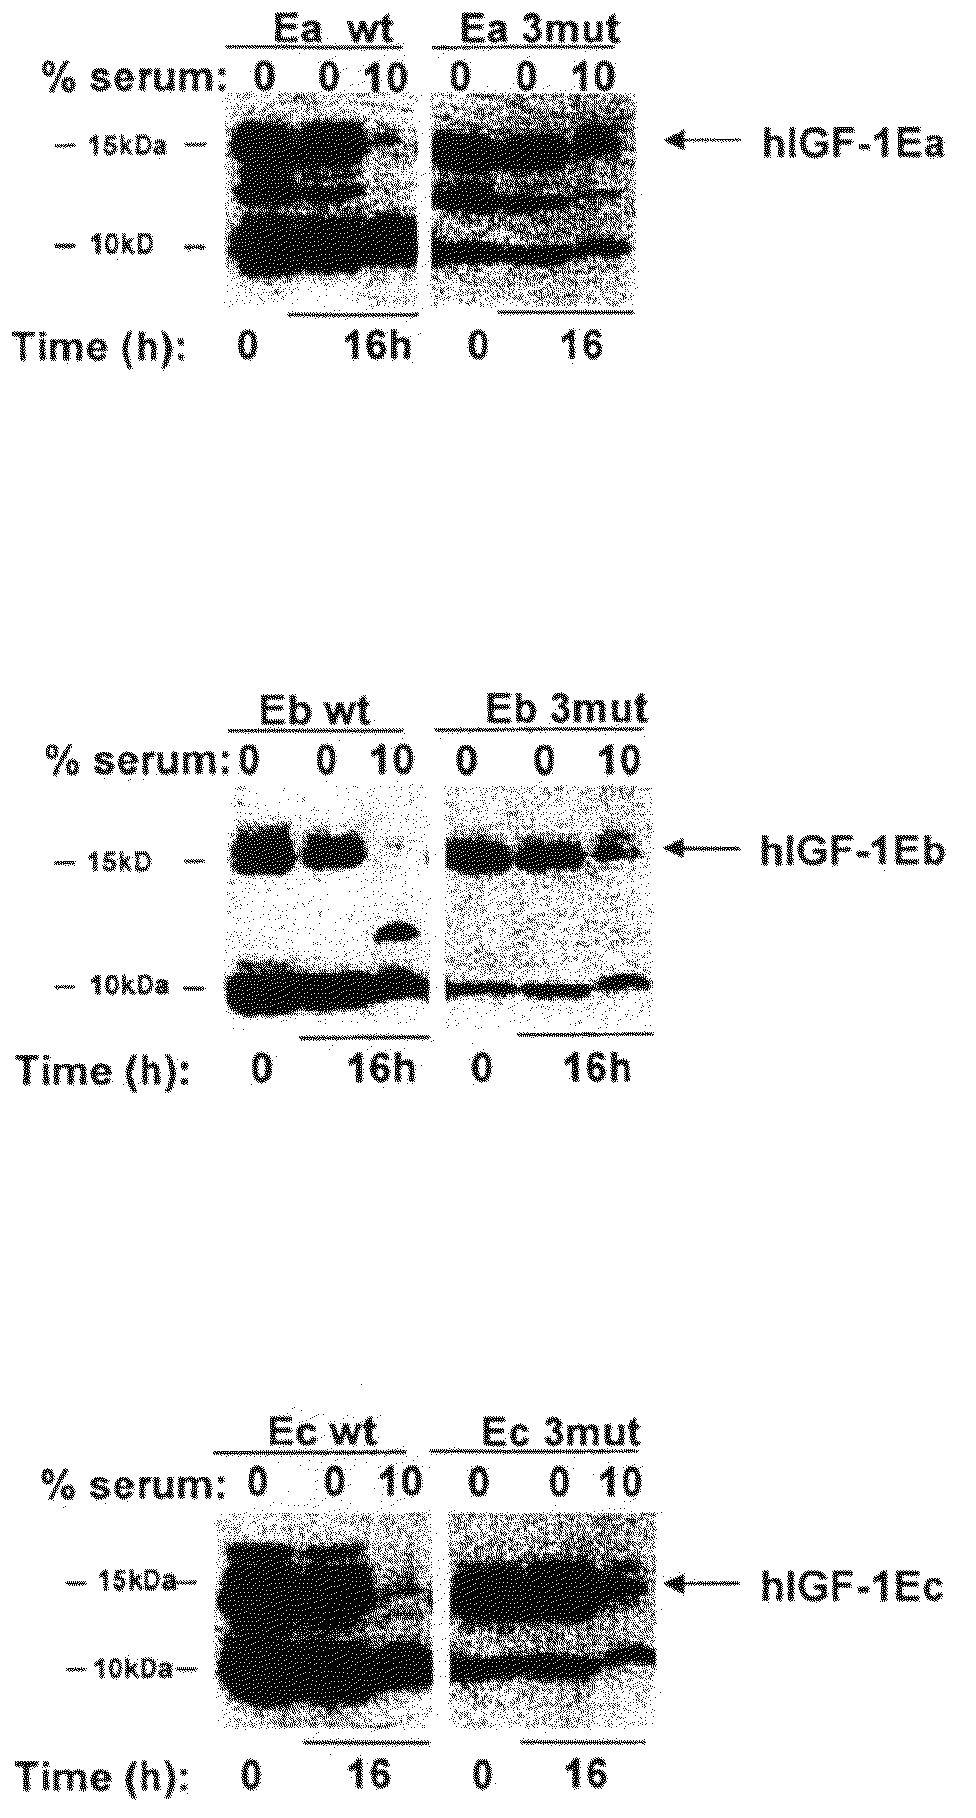 Stabilized insulin-like growth factor polypeptides